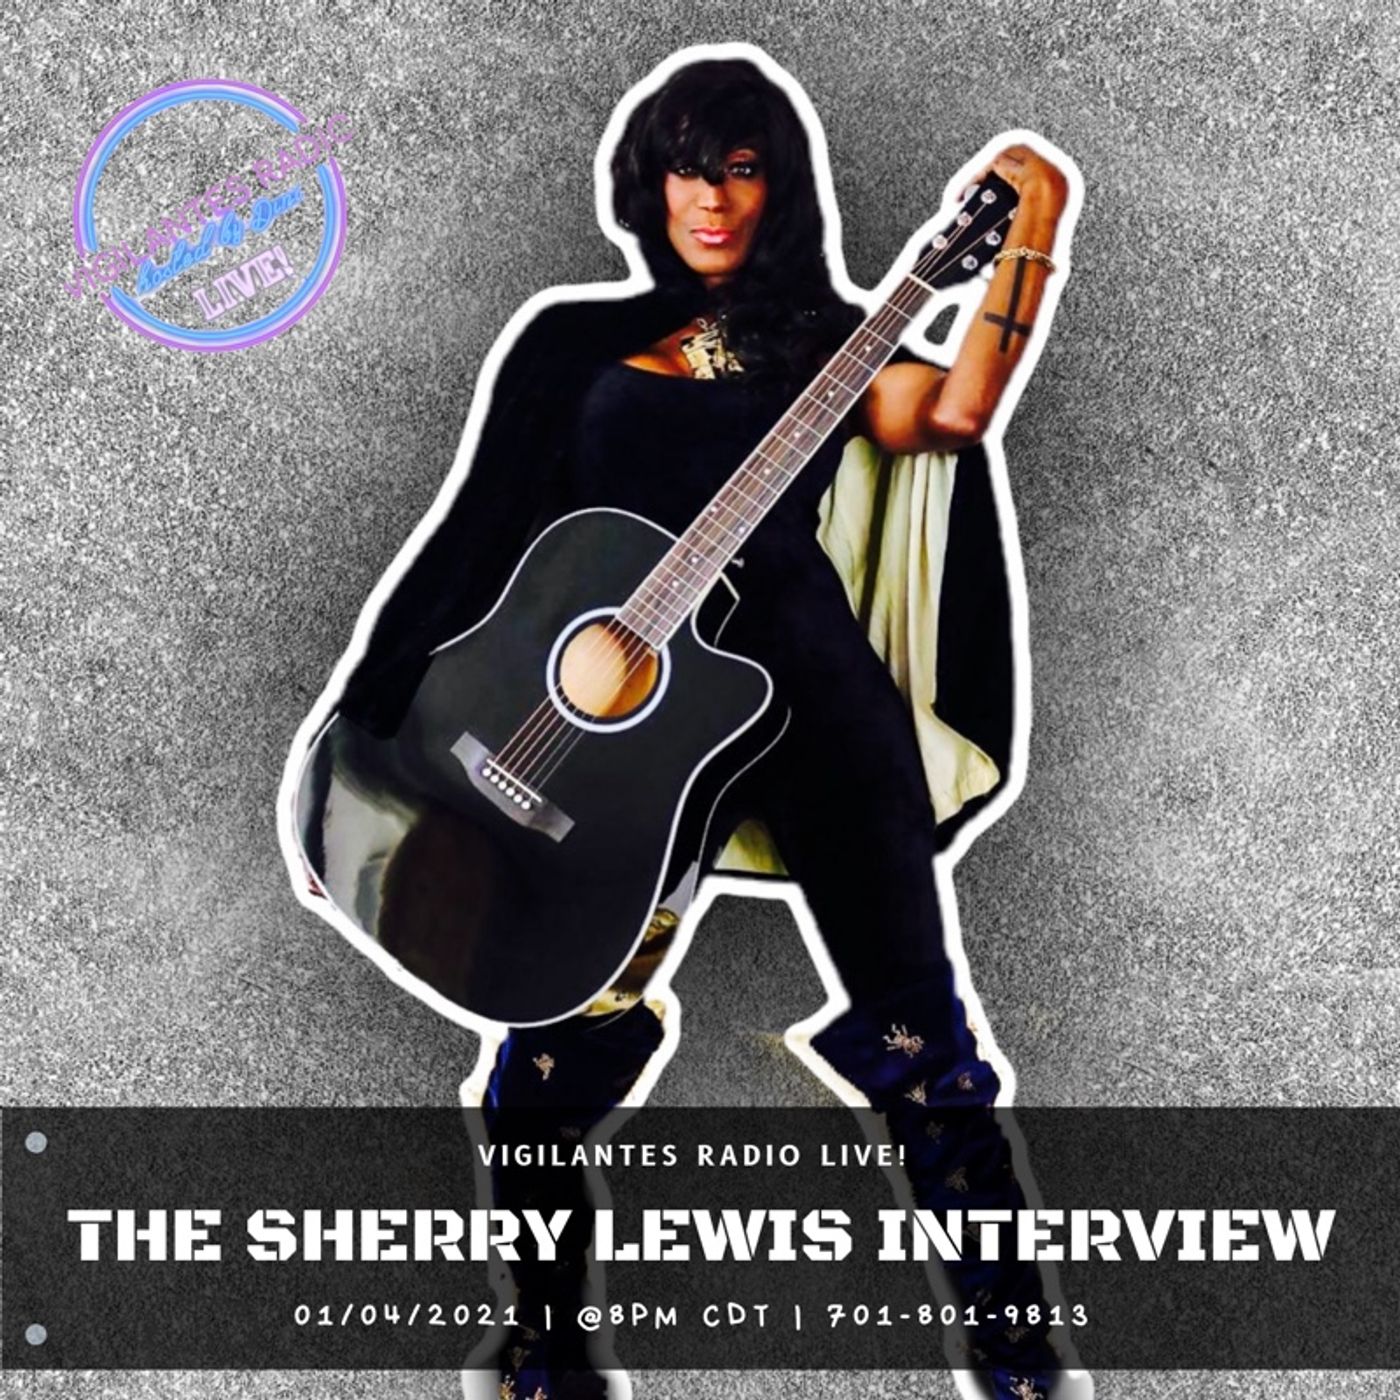 The Sherry Lewis Interview. Image